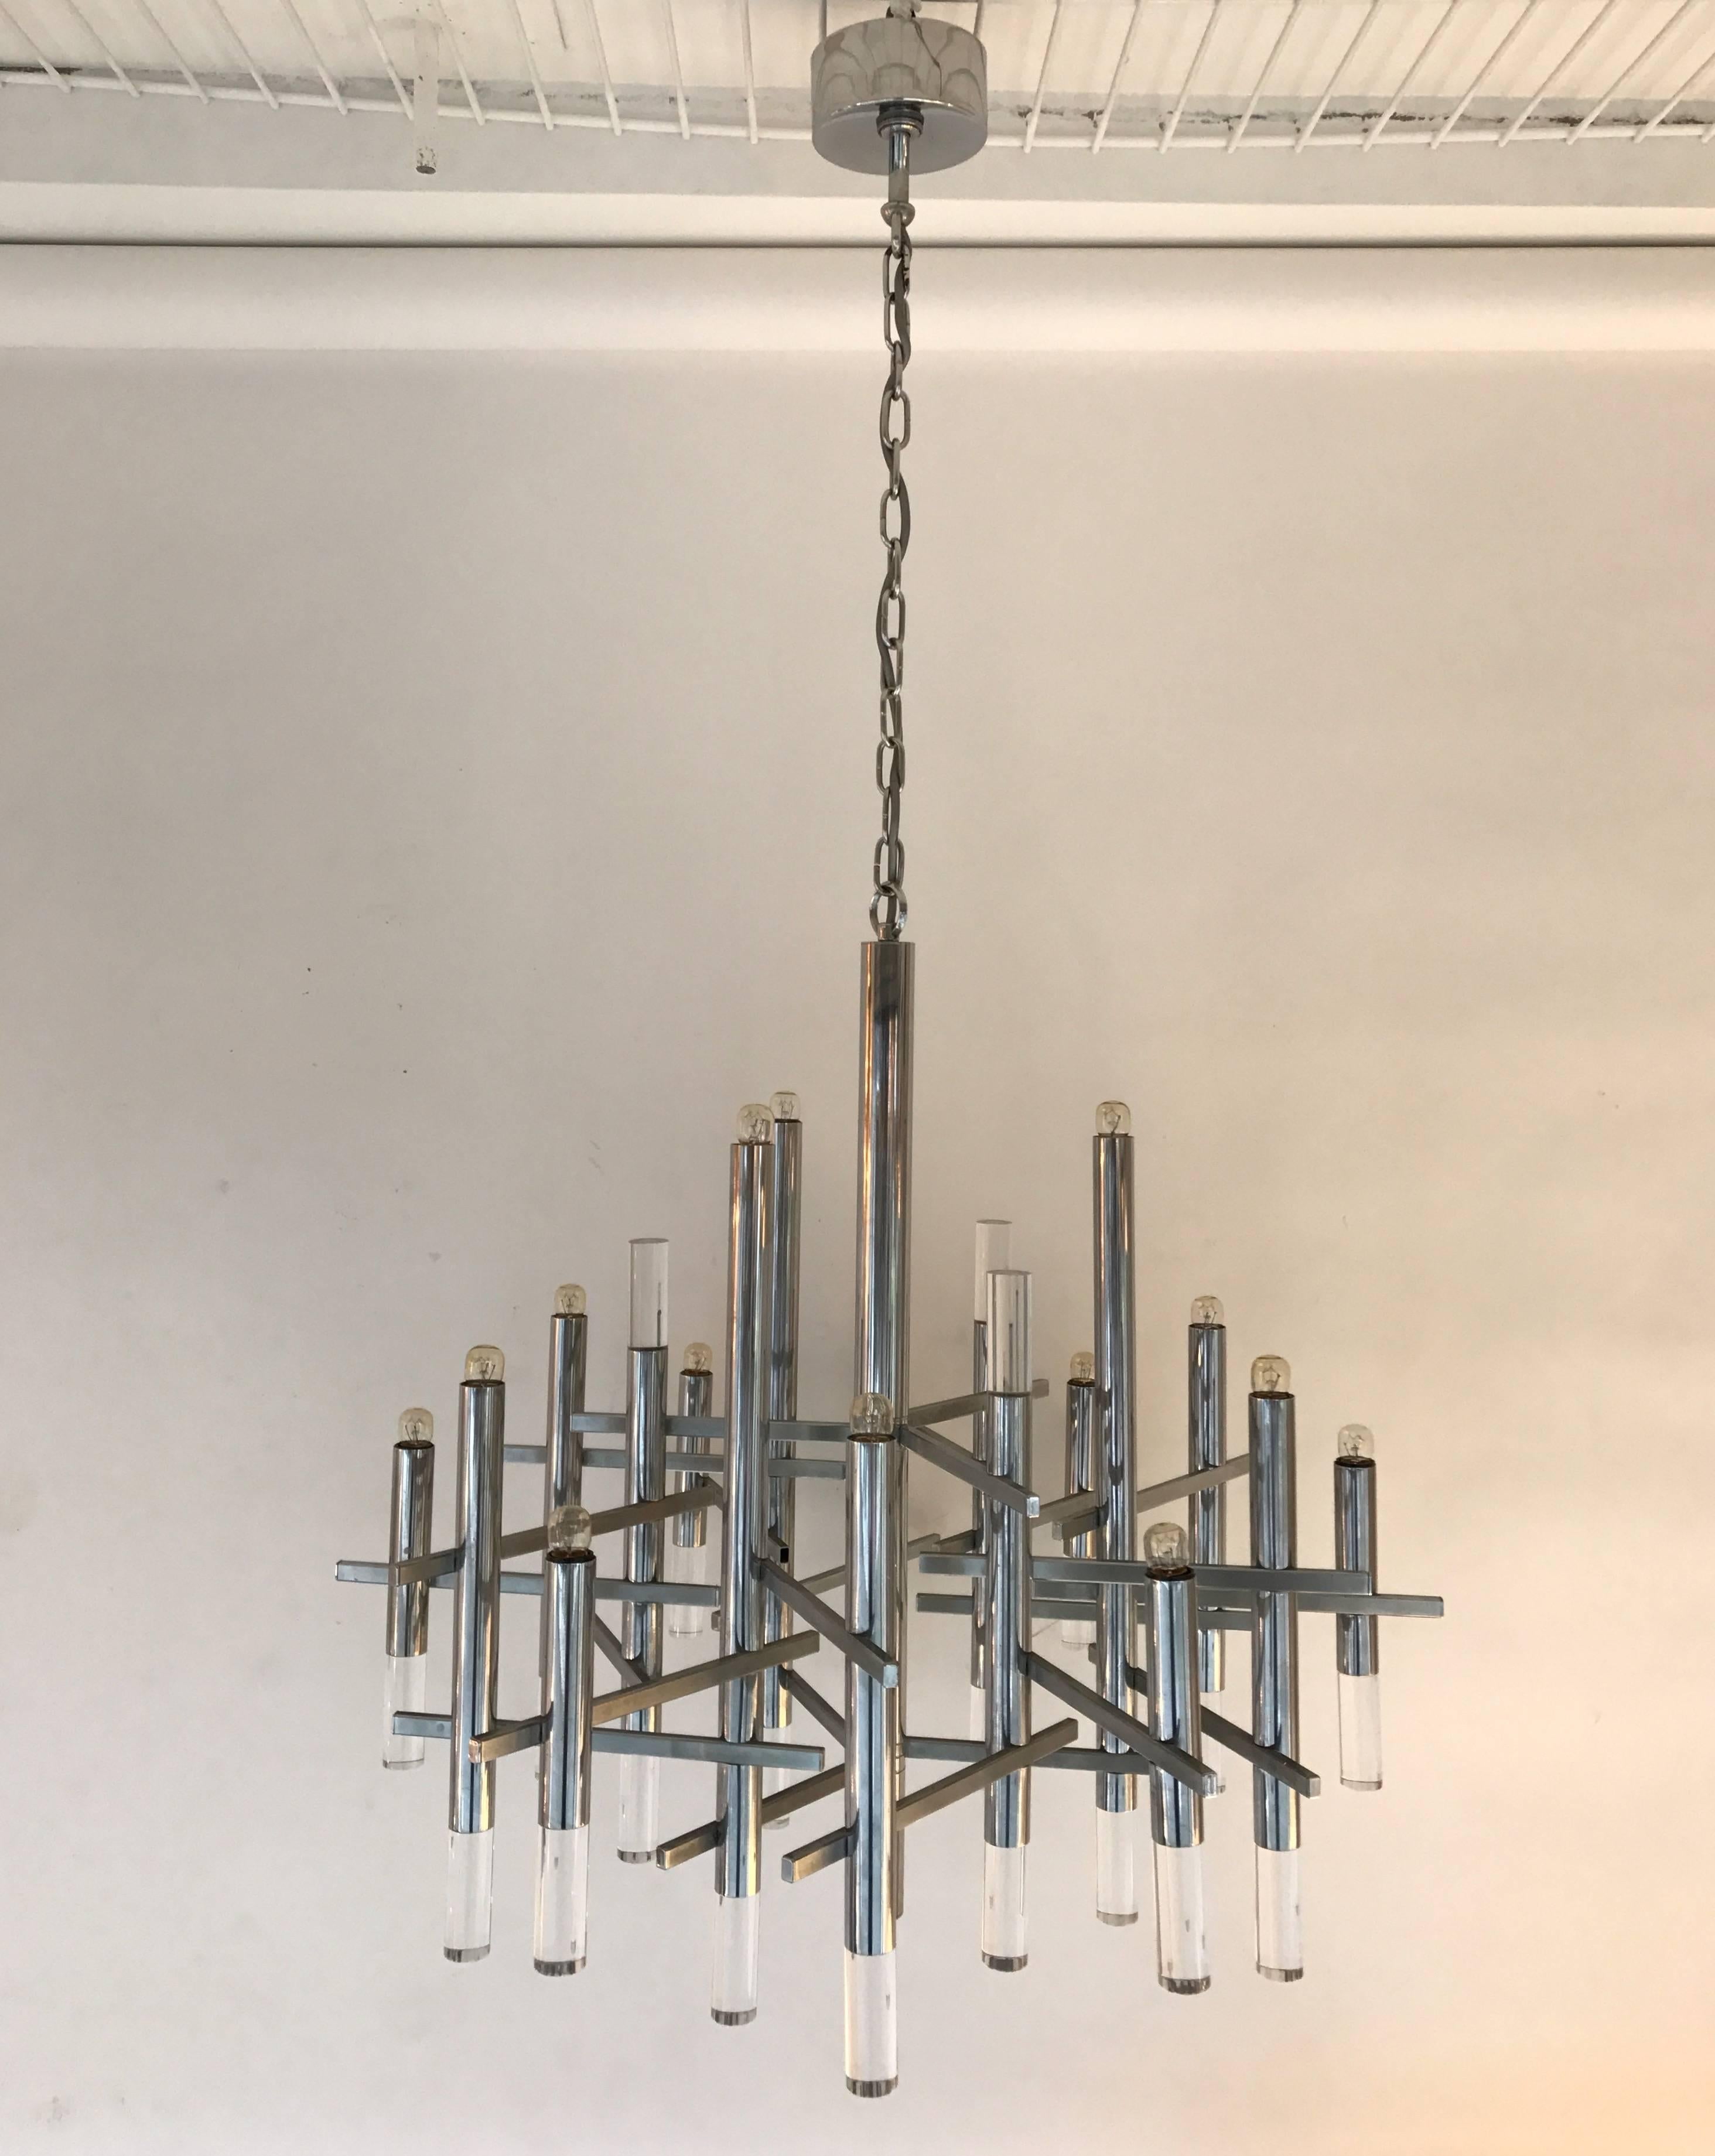 Chandelier or ceiling pendant light by the designer Gaetano Sciolari. Metal chrome and lucite. A futurist model with a touch of neoclassical style. Original Sciolari stamp. Famous design like Reggiani, Hollywood Regency. Easily adjustable in height.